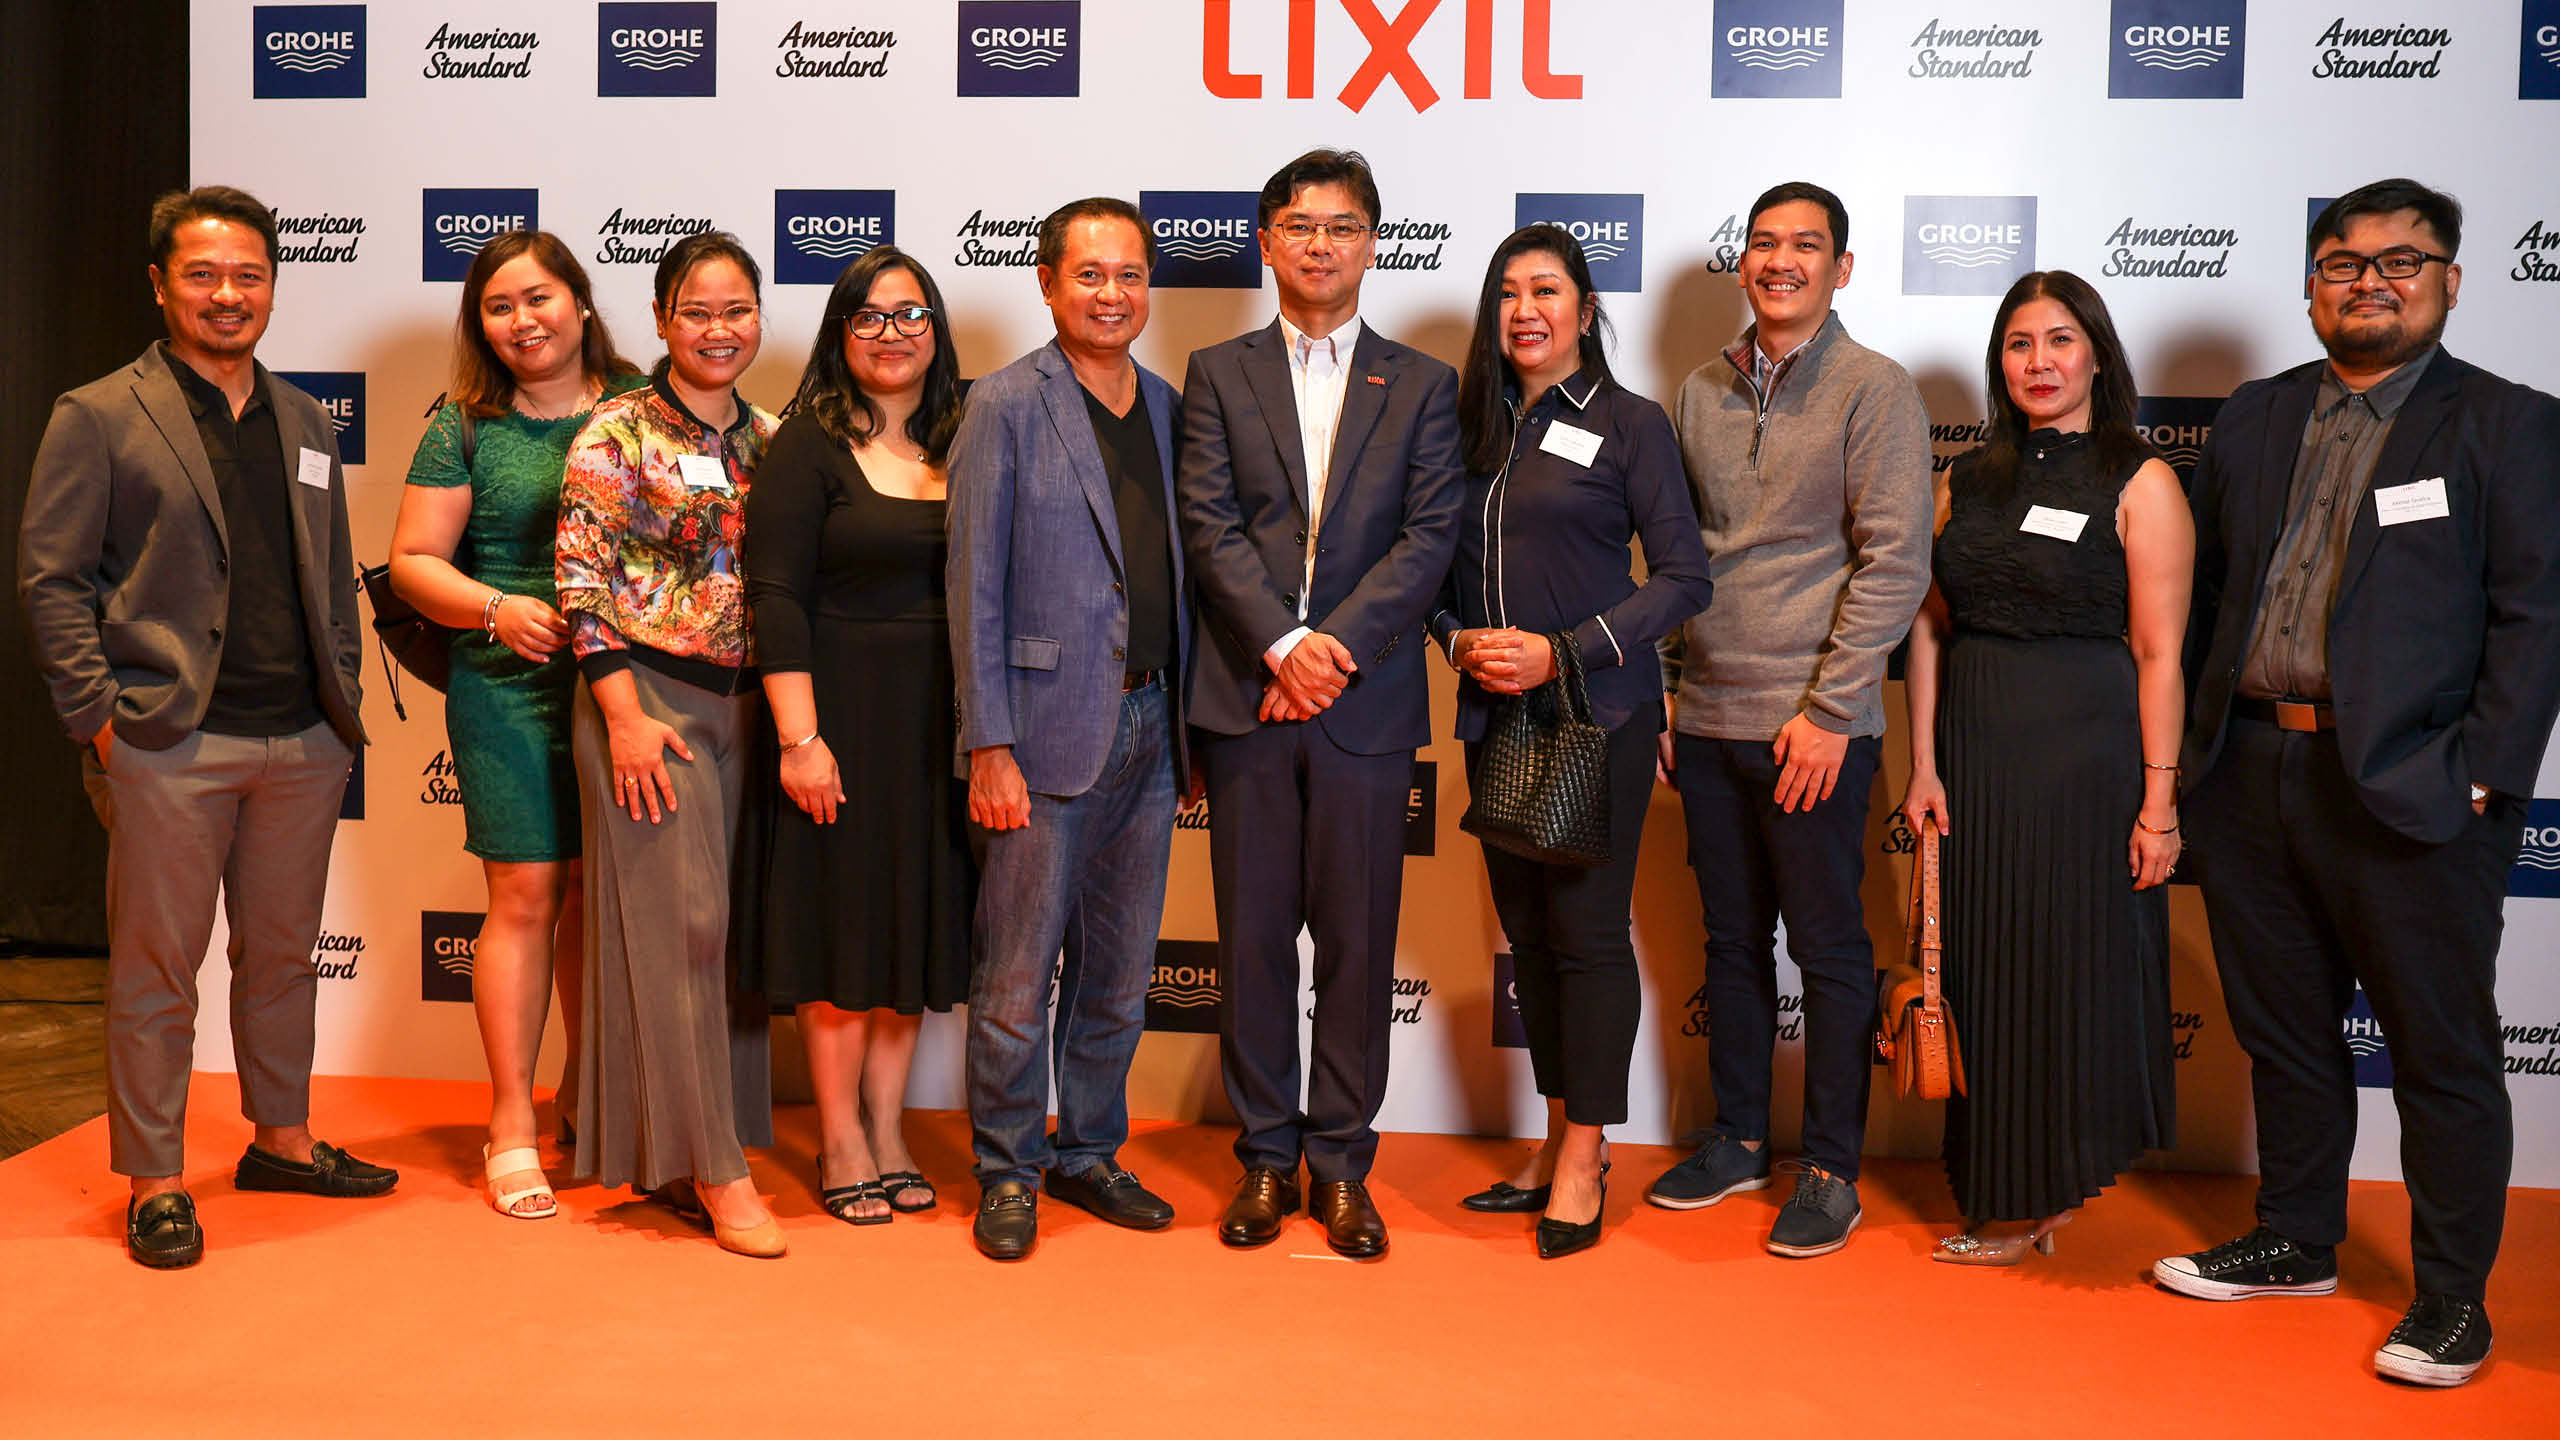 IPA Winners and LIXIL team from the Philippines arrived at the Welcome Cocktail Reception
From left to right: Hermie Limbo, Leader, Philippines, LWT APAC; Anna Kristina Cura, Leader, Specifications Philippines, LWT APAC; Liezl Niegas, Area Head Manager, Alveo Land; Melodee Ann Gonzales, Deputy Head Innovative Design Group, Alveo Land; Arch. Leo Parinas, Founding Principal, CEO & Director of Design, LPPA Design Group; Satoshi Konagai, Leader, LWT APAC; Cathy Saldana, CEO, PDP Architects; Ron Morell Magsankay, project Development Manager, Alveo Land; Heide Lopez, Leader, Project Sales, Grohe & INAX Philippines, LWT APAC; Mikhail Serafica, E-commerce & Digital Leader, LWT APAC